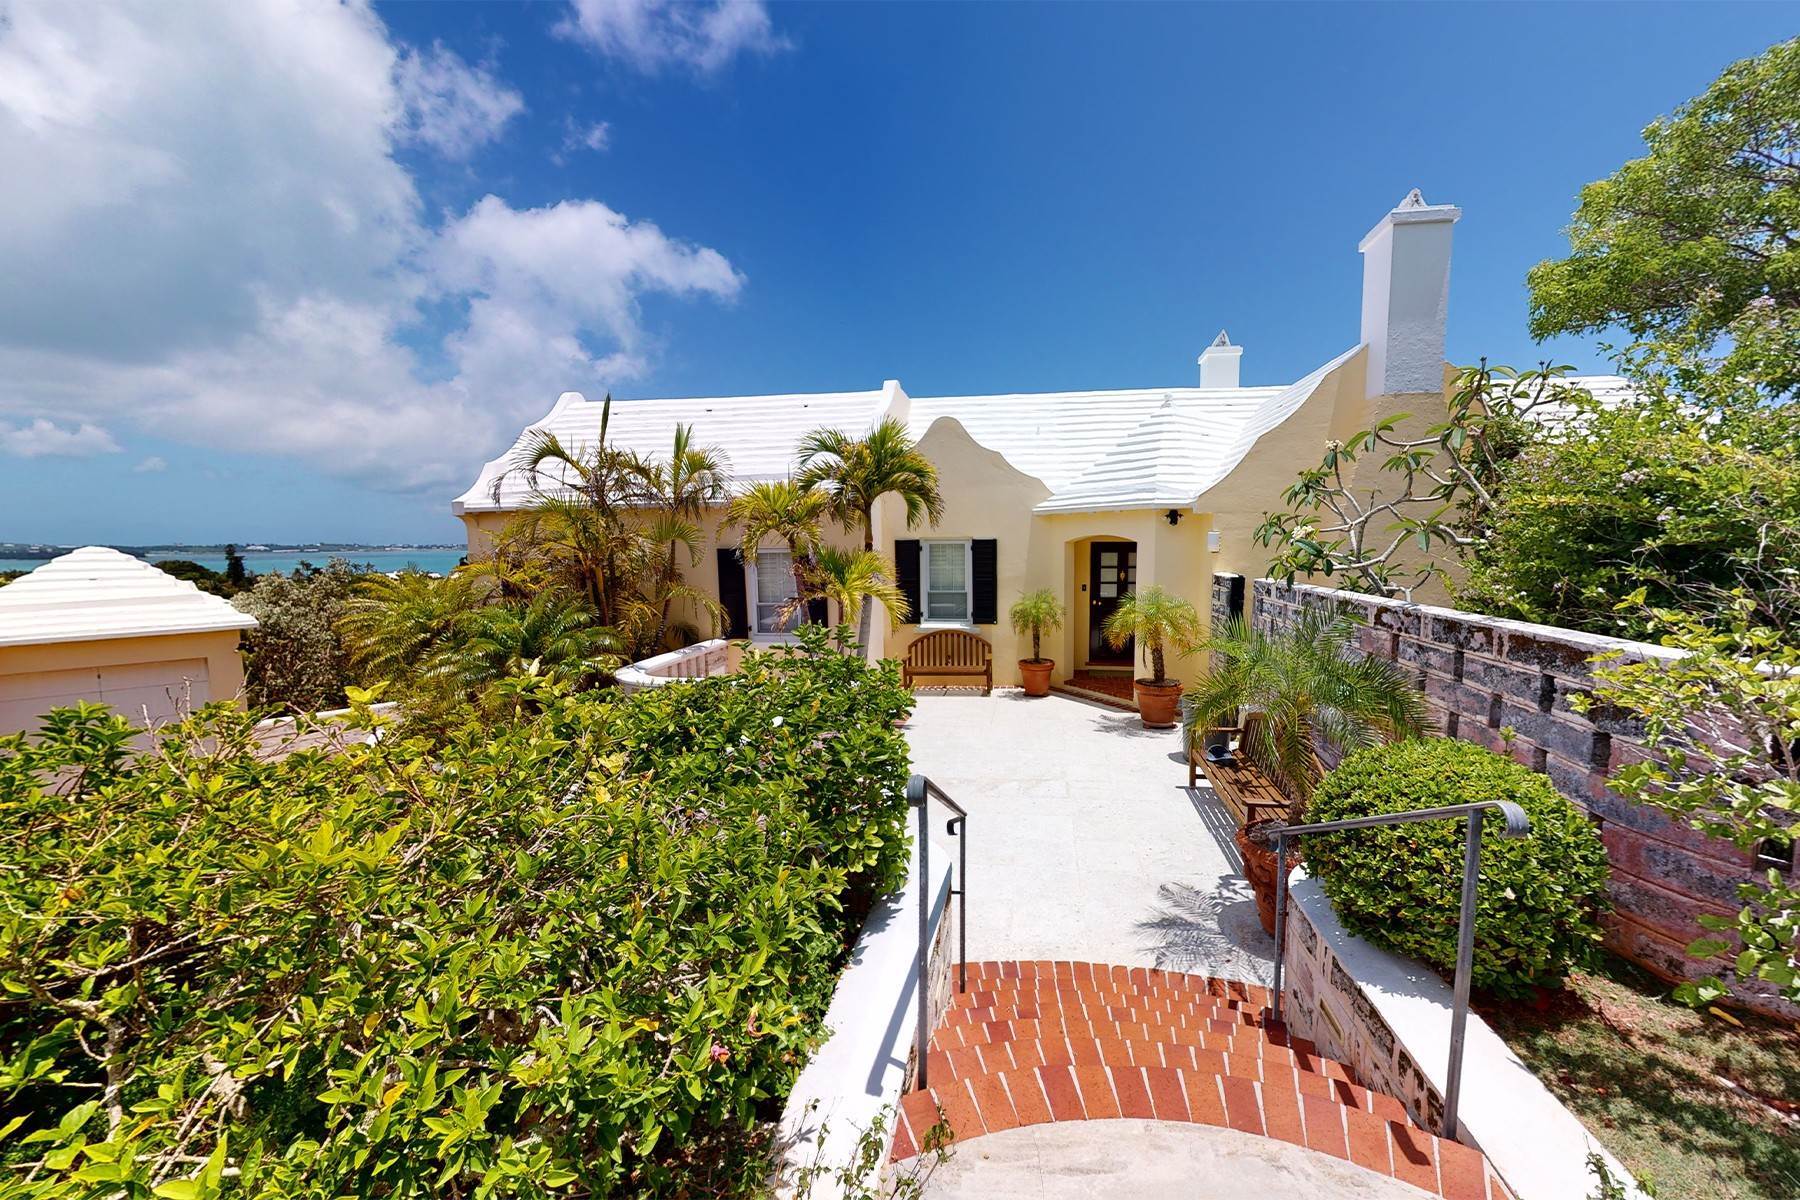 22. House for Sale at Atlanta By The Sea and Jolly Roger 2, Mid Ocean Drive St Georges Parish, HS 02 Bermuda